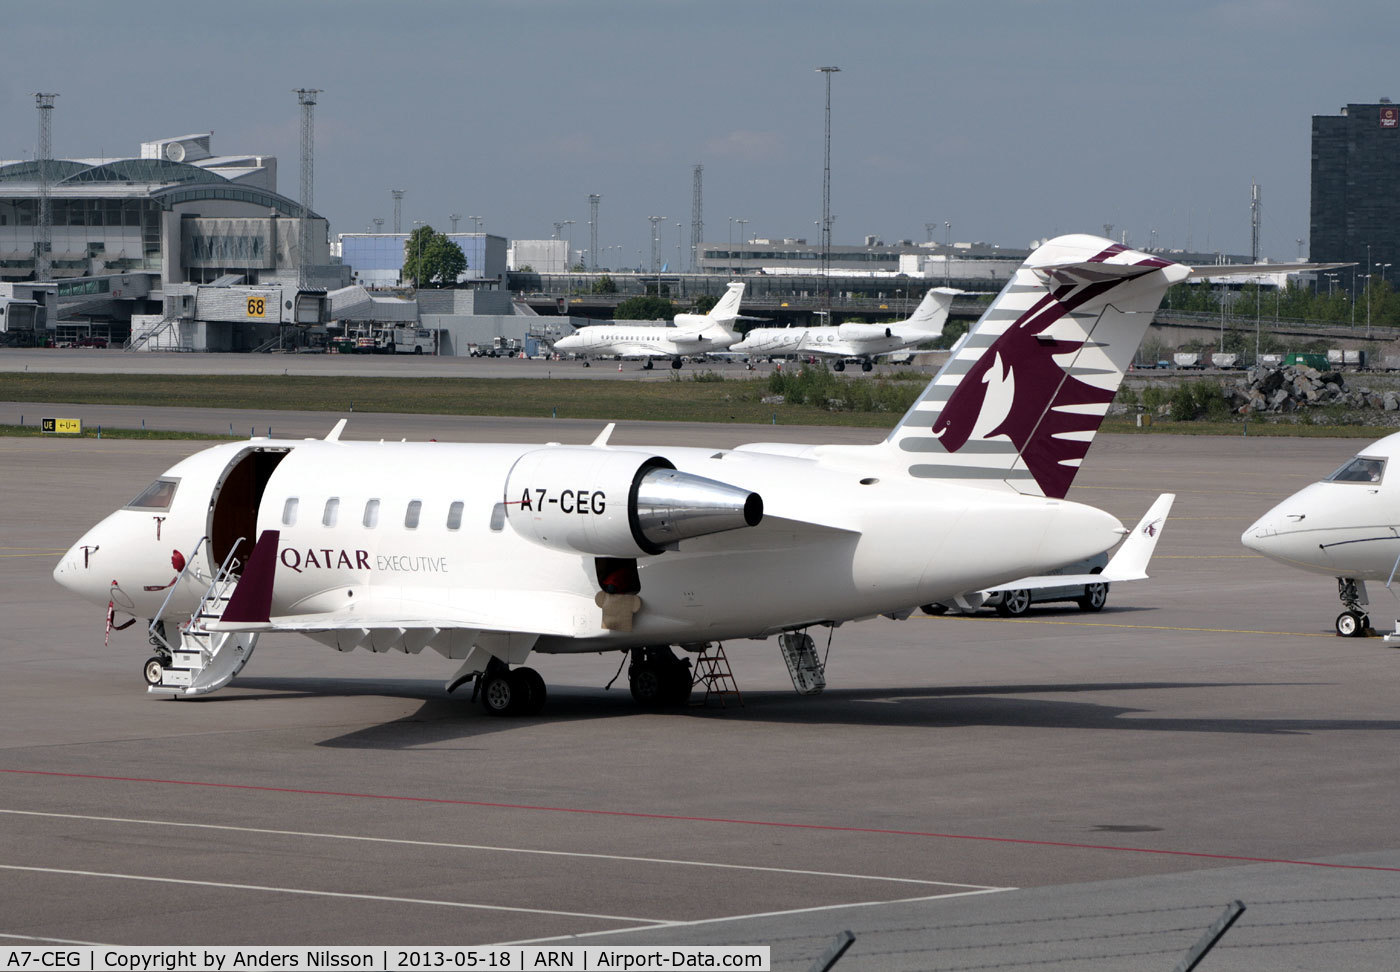 A7-CEG, 2010 Bombardier Challenger 605 (CL-600-2B16) C/N 5857, Parked at ramp R.